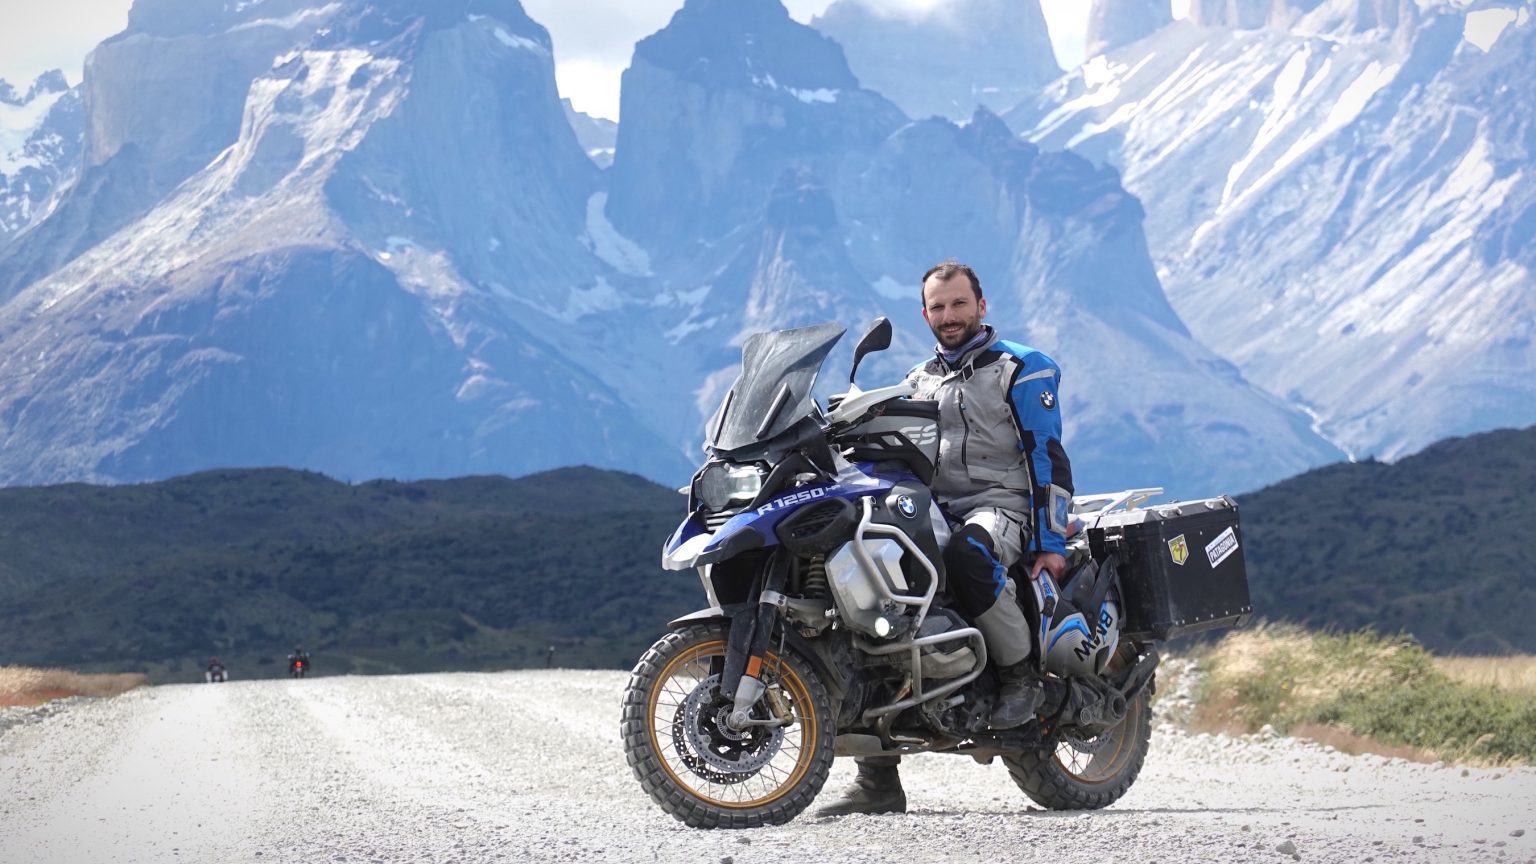 BMW R1250GS Adventure in Patagonia - A Journey to the End of the World